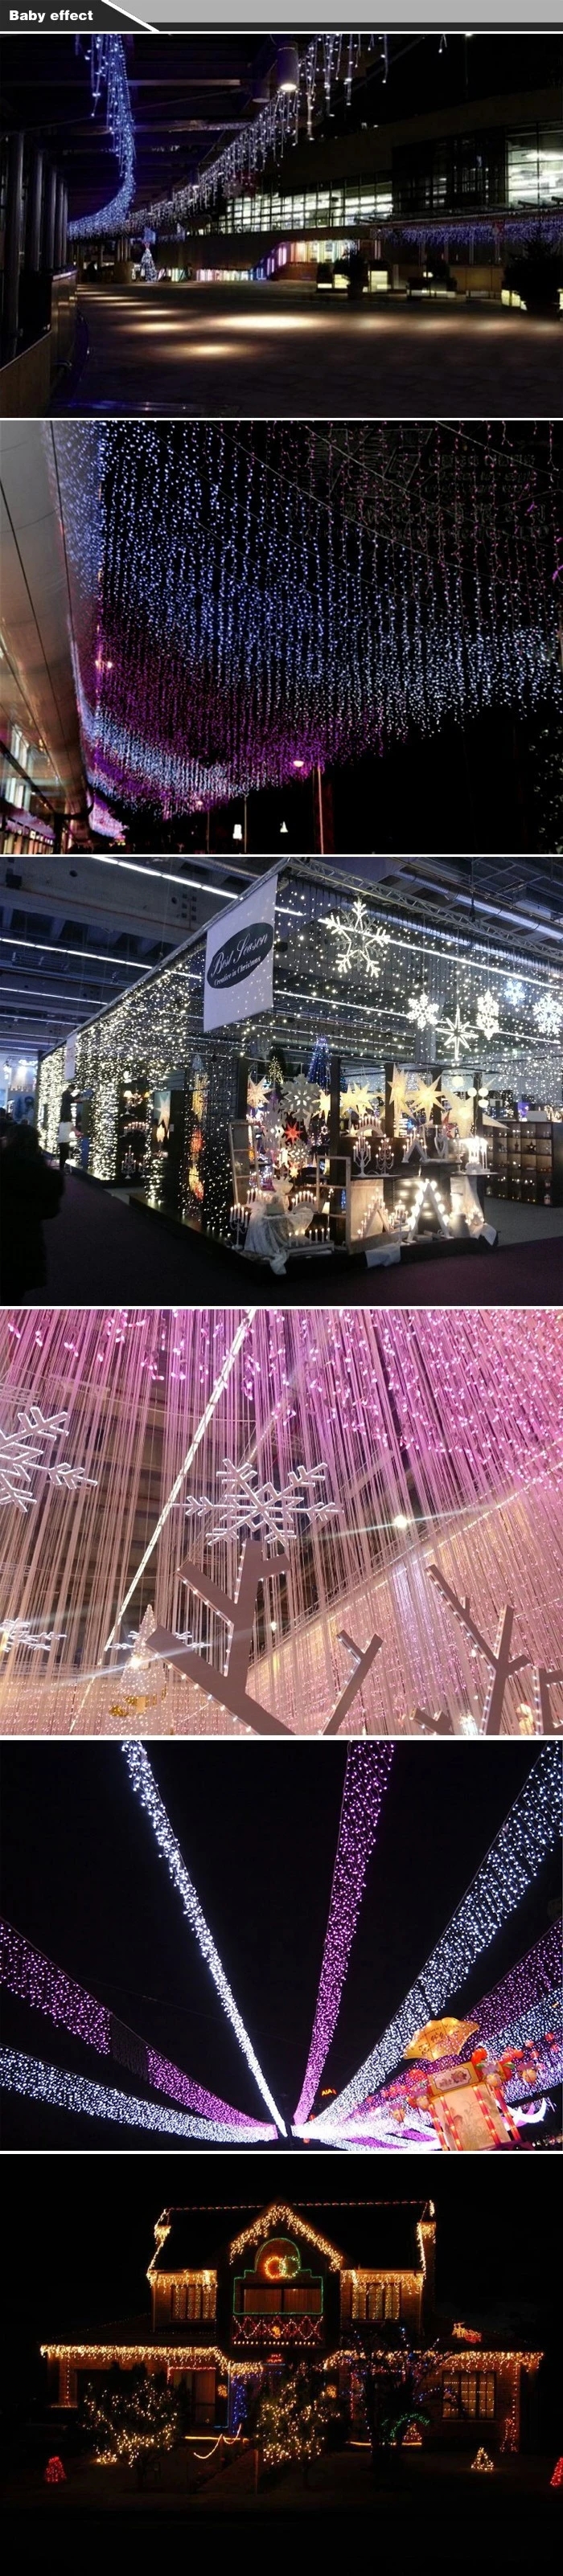 Christmas-4M-96-LED-Indoor-Outdoor-String-Lights-220V-Curtain-Icicle-Drop-LED-Party-Garden-Stage-Dec-1737459-8